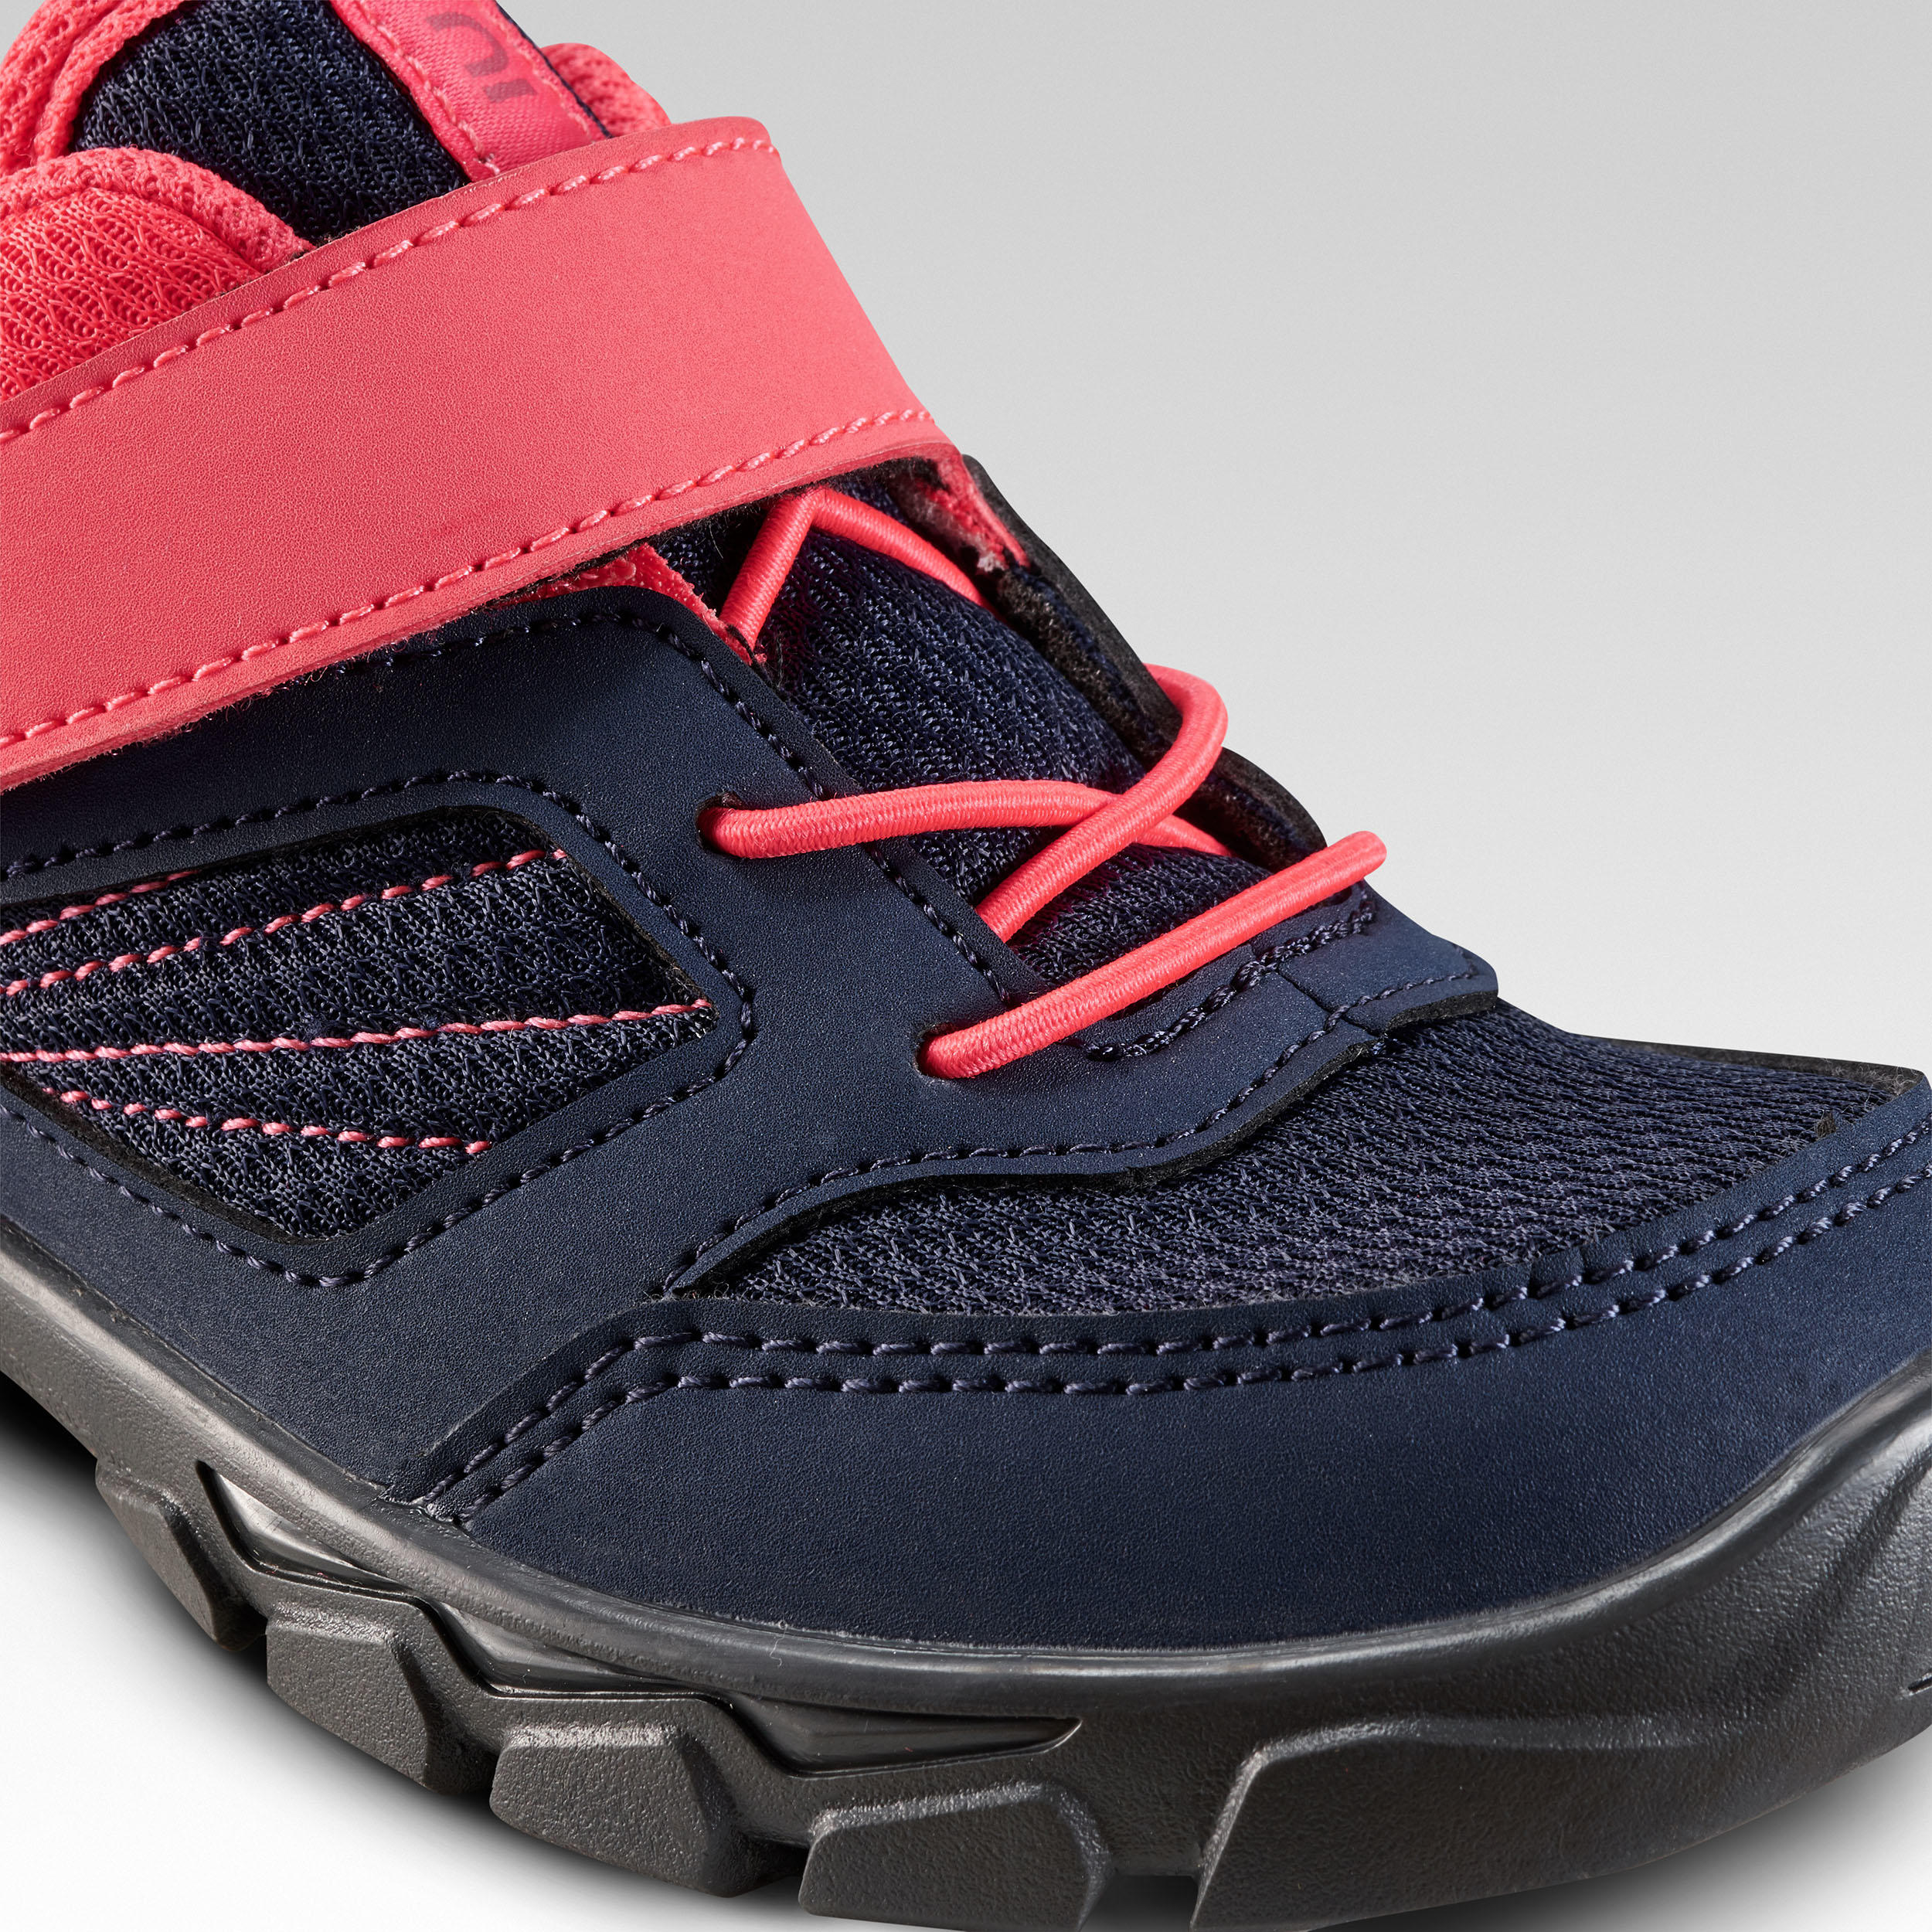 Kids’ Hiking Shoes with Rip-tab MH100 from Jr size 7 to Adult size 2 Blue & Pink 8/8